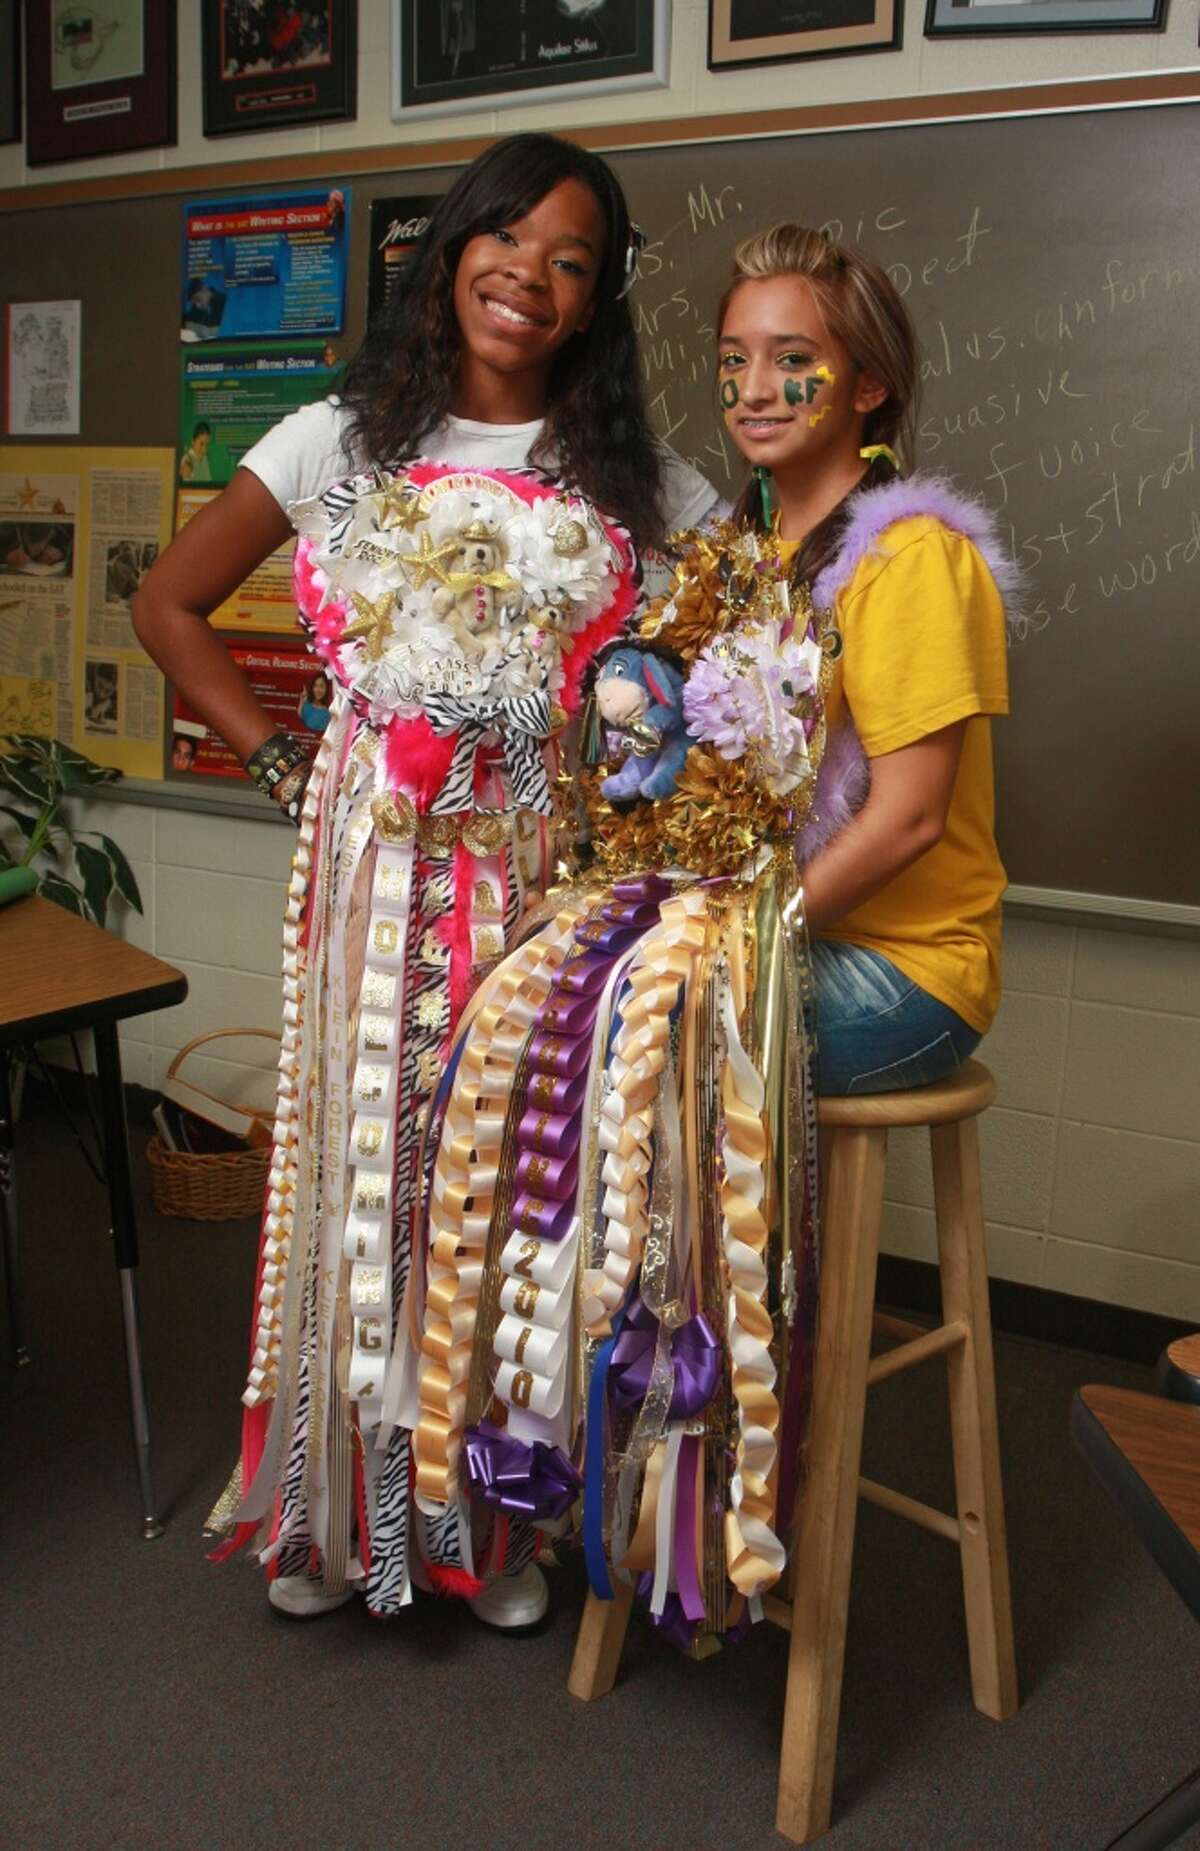 Homecoming mums For southerners, homecoming is basically a holiday and having the most over-the-top mum is a necessity no matter how heavy it is.